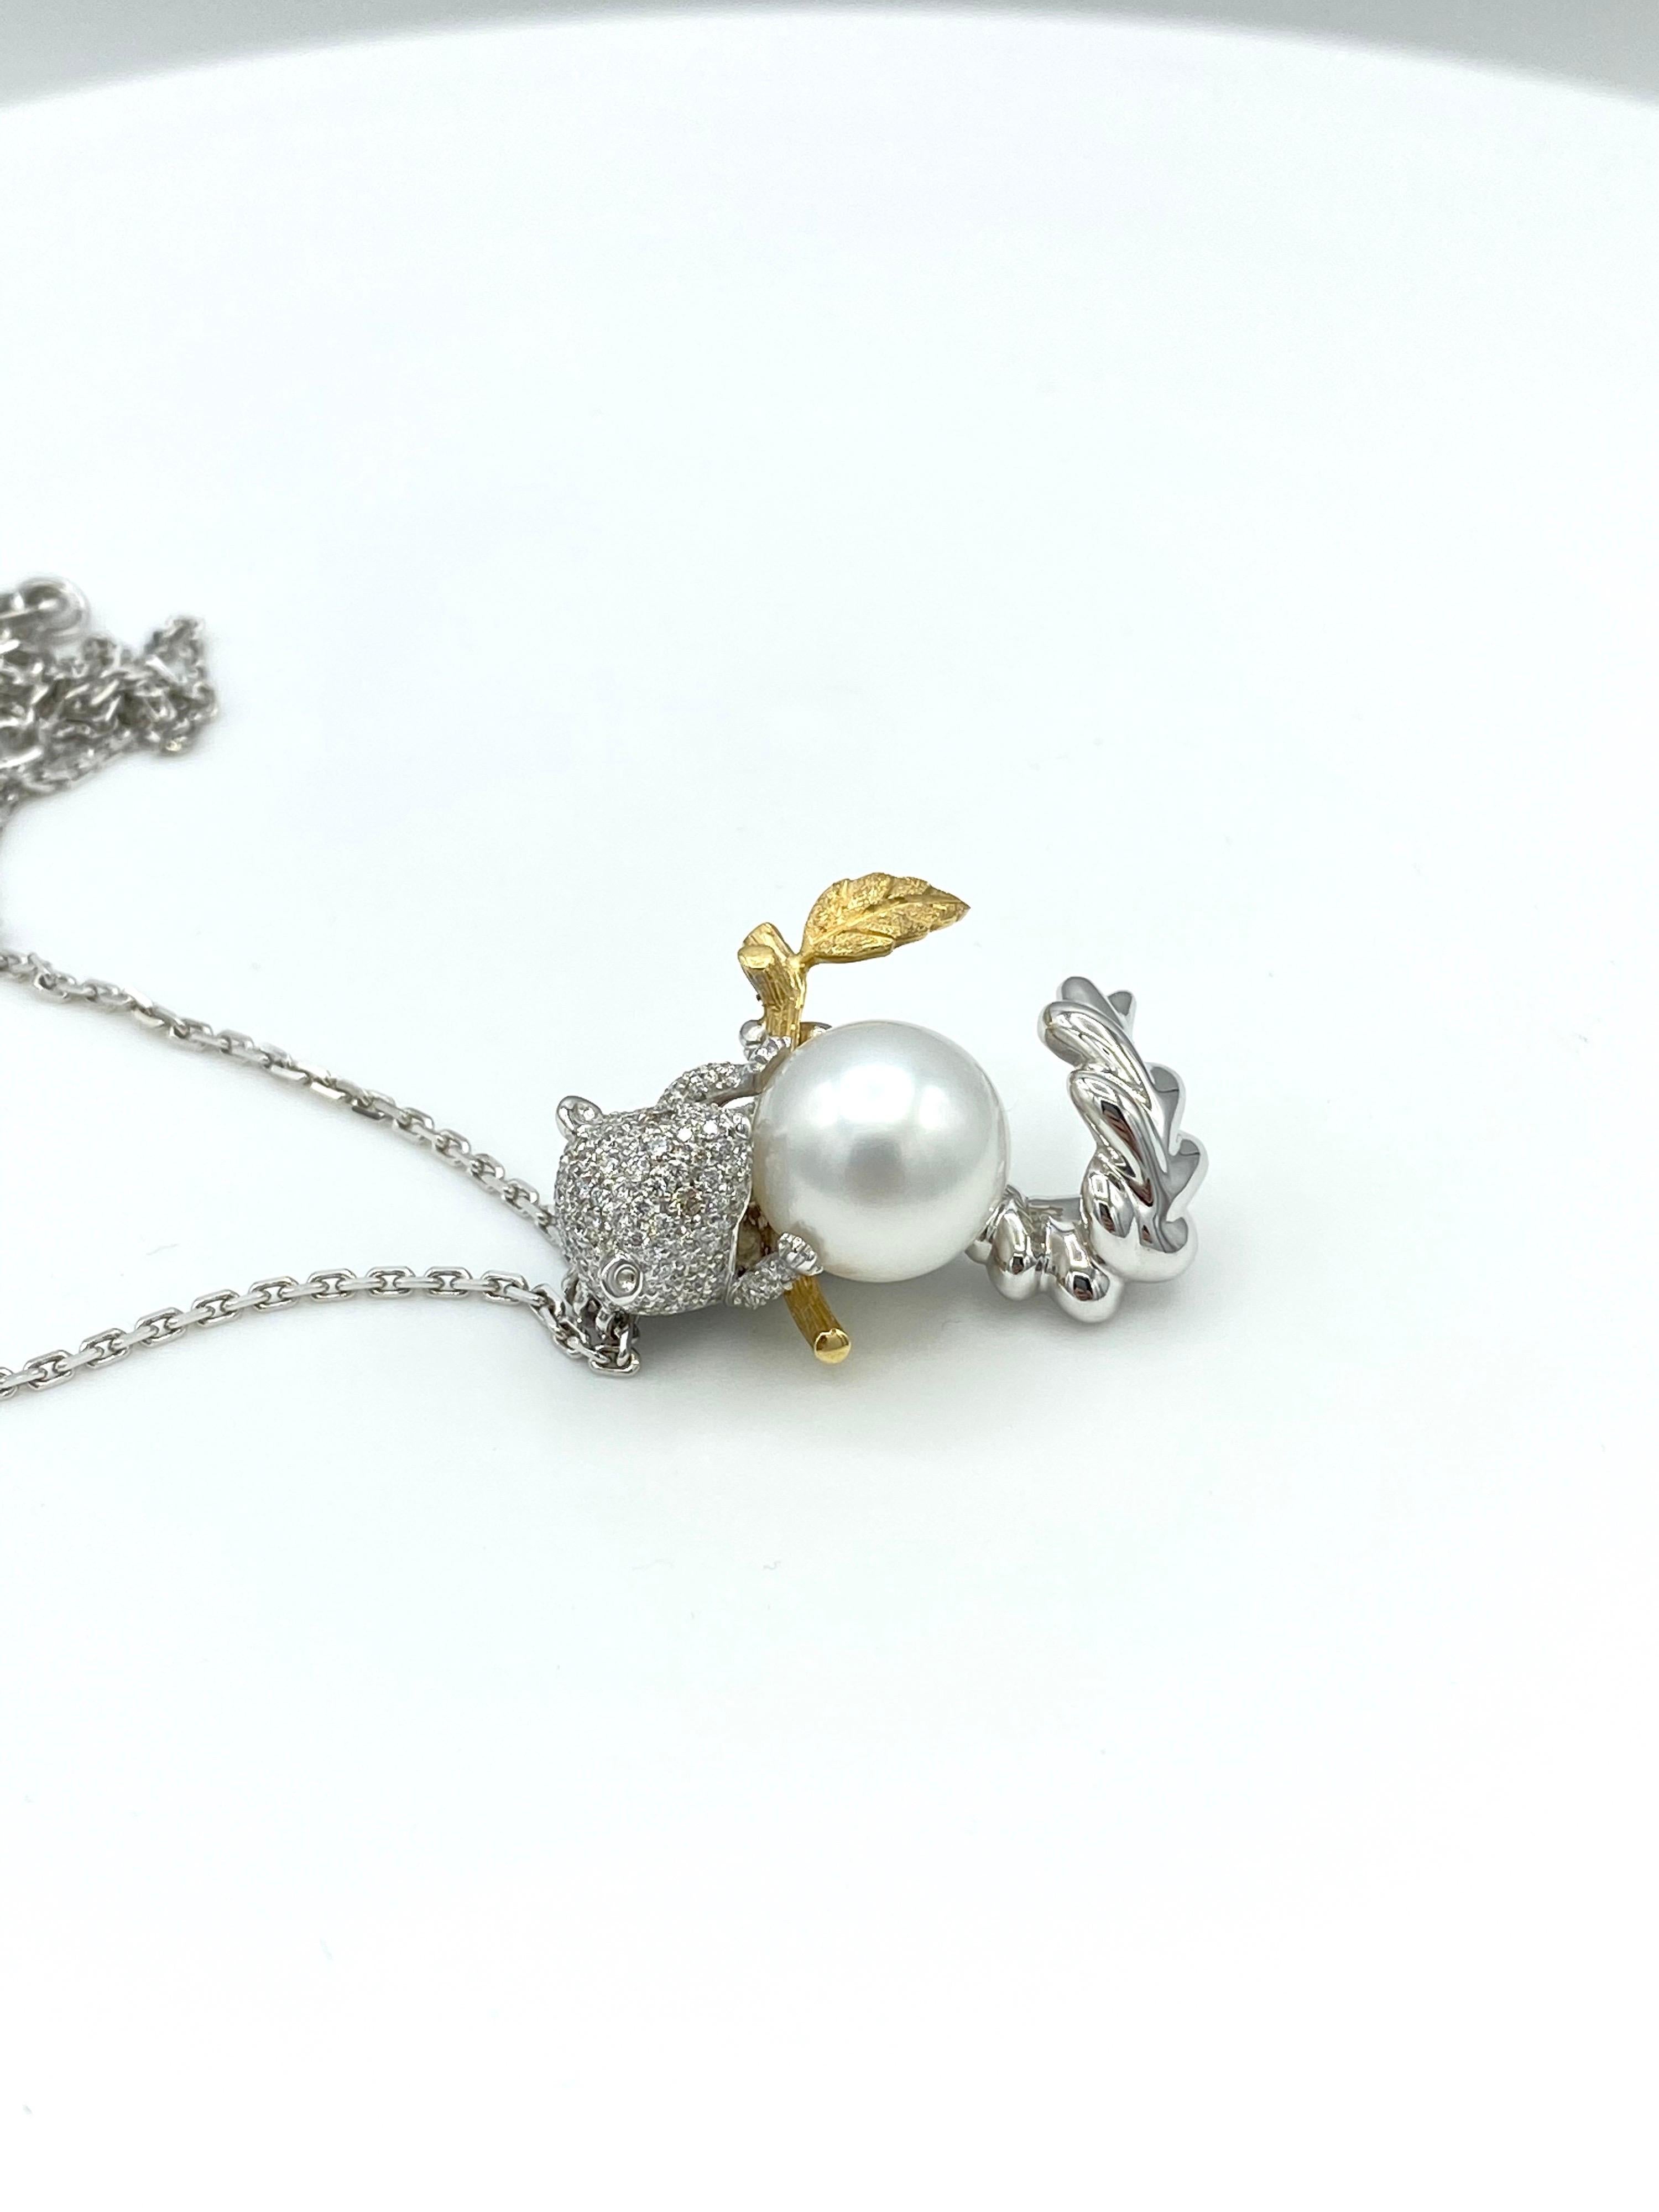 Petronilla 18Kt Gold Animal Stoat White Diamond SouthSea Pearl Pendant Necklace  For Sale 4